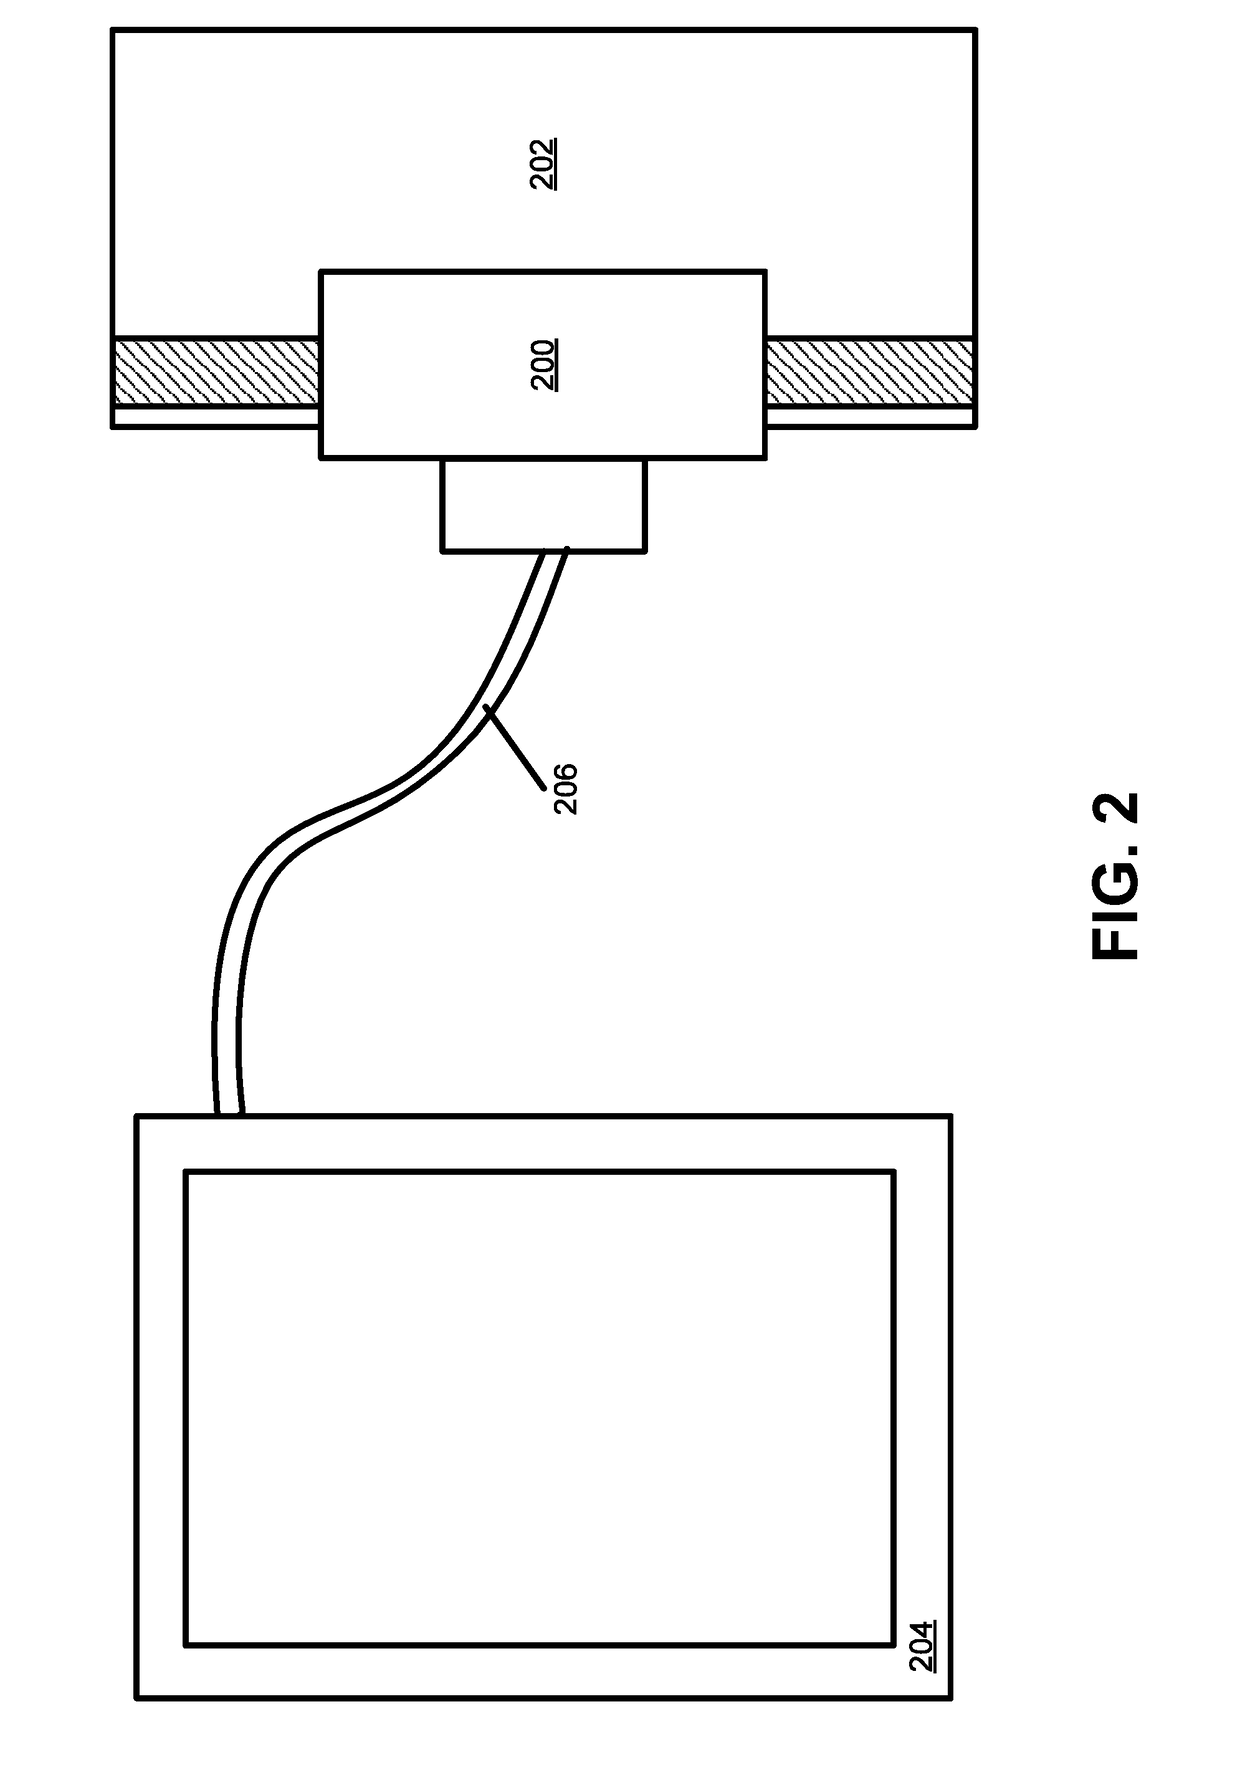 Systems and methods for user identification using payment card authentication read data